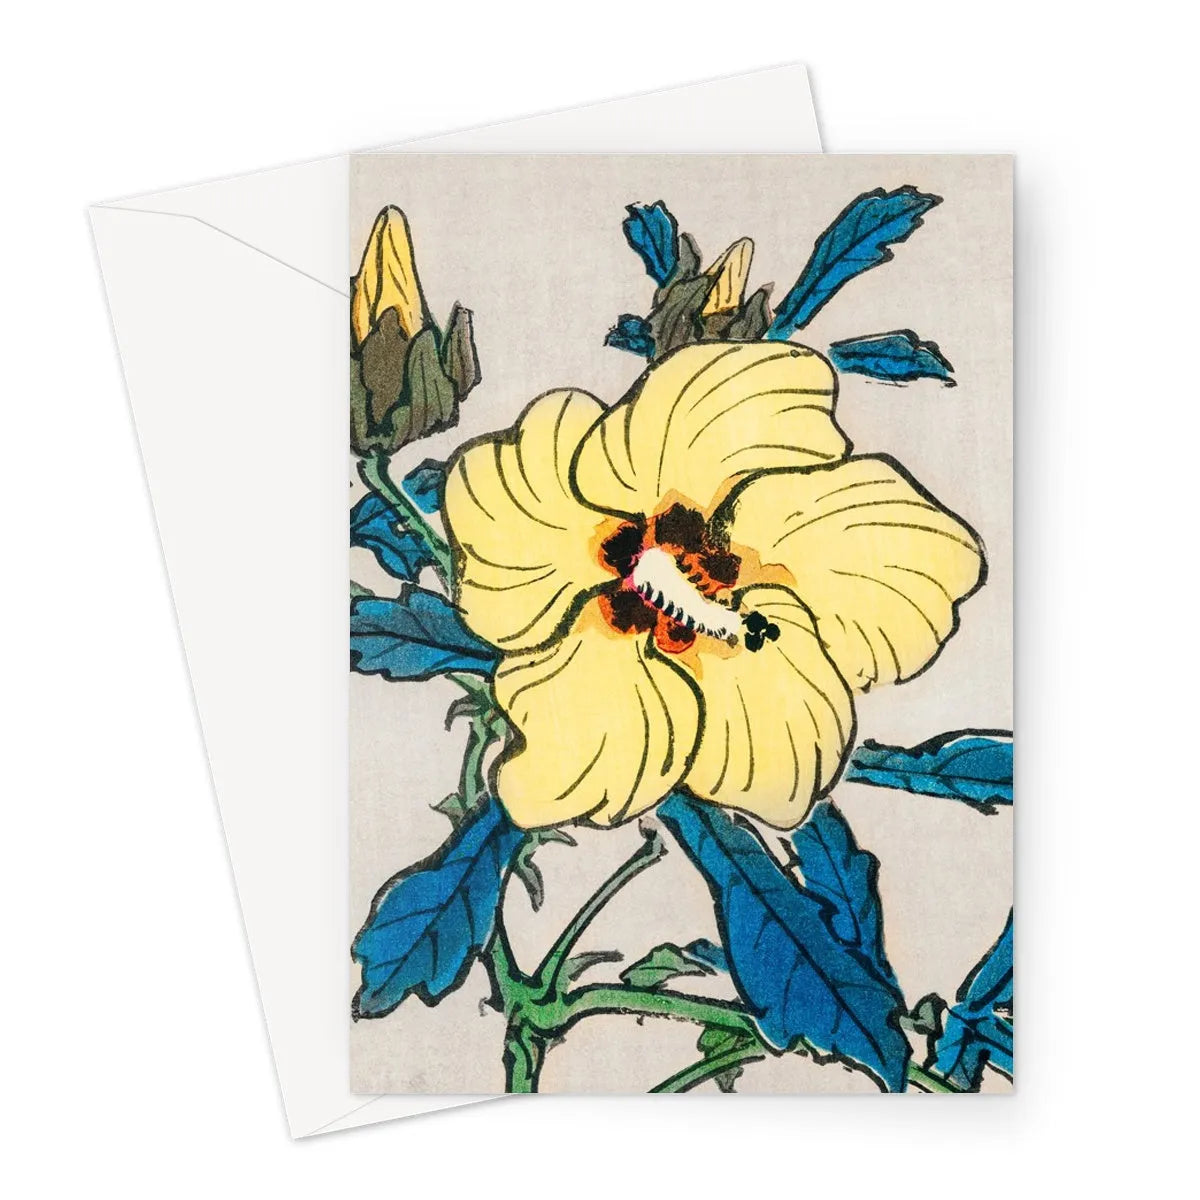 Hibiscus By Kōno Bairei Greeting Card - A5 Portrait / 1 Card - Greeting & Note Cards - Aesthetic Art